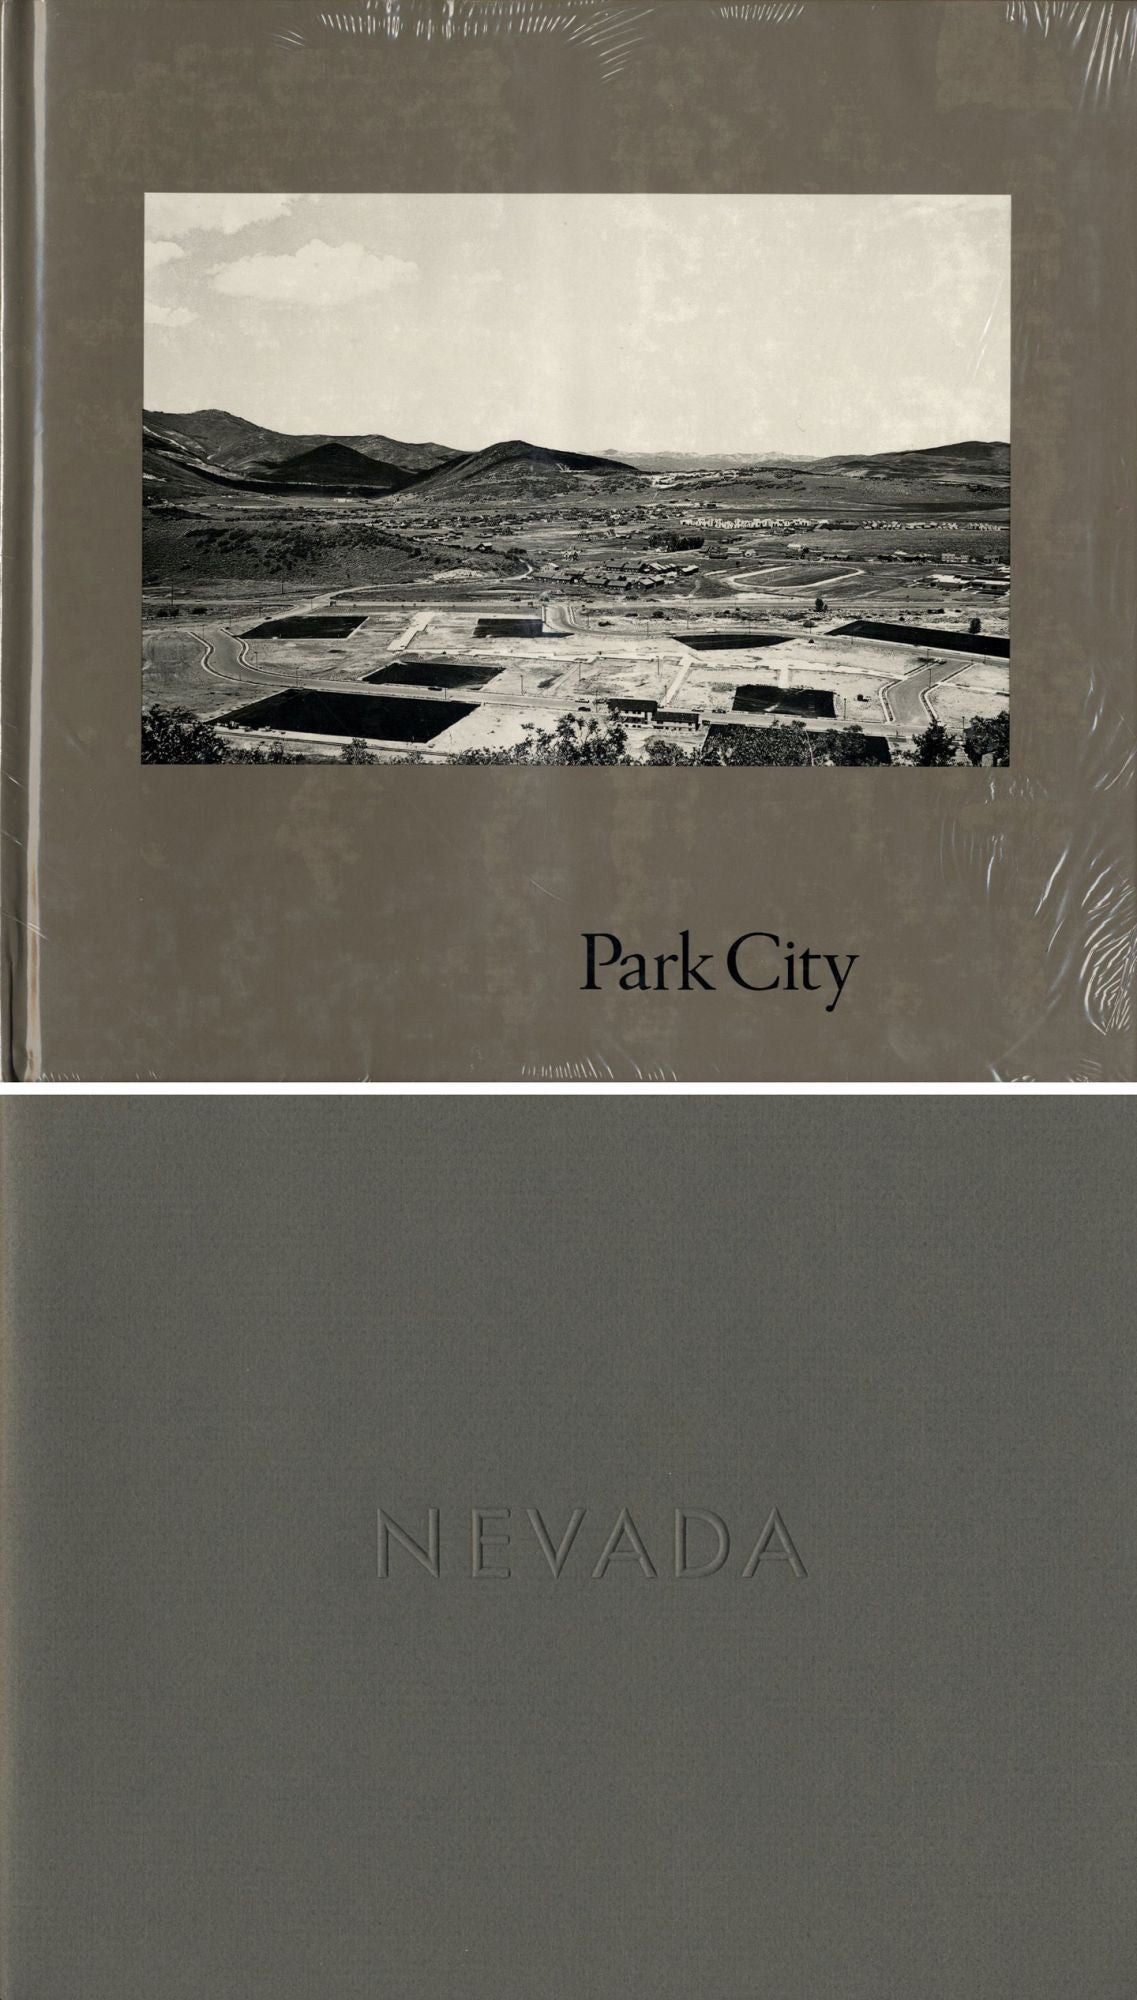 Lewis Baltz: Park City (First Edition) [SIGNED] (New condition with publisher's shrink-wrap) -- INCLUDES a copy of Lewis Baltz: Nevada (First Edition) [SIGNED] & copy of the publisher ARTSPACE's original 1980 book release announcement